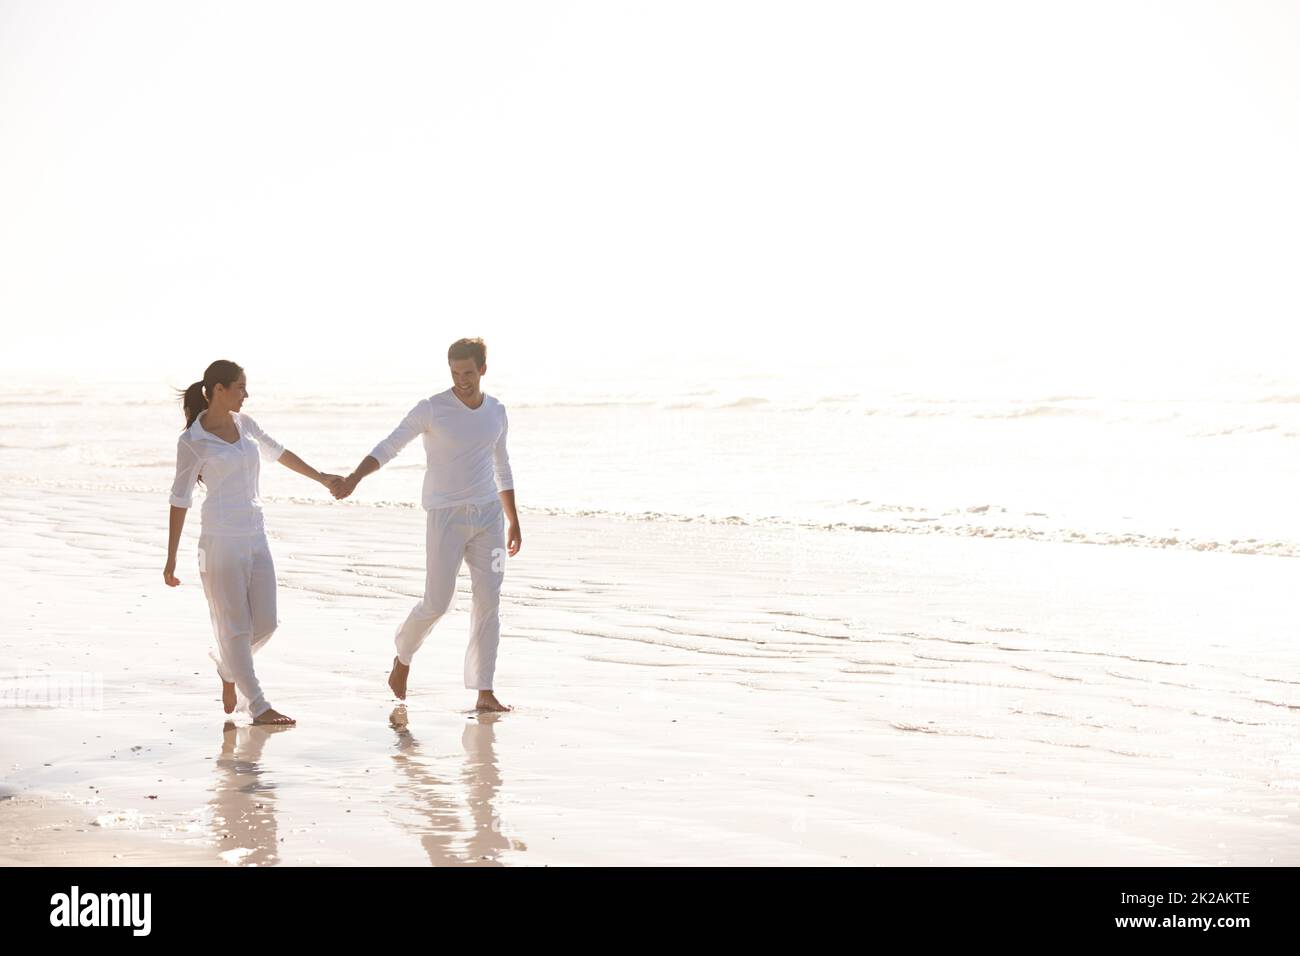 Holding hands through natures beauty. Full length shot of an attractive young couple dressed in white walking along a beach. Stock Photo